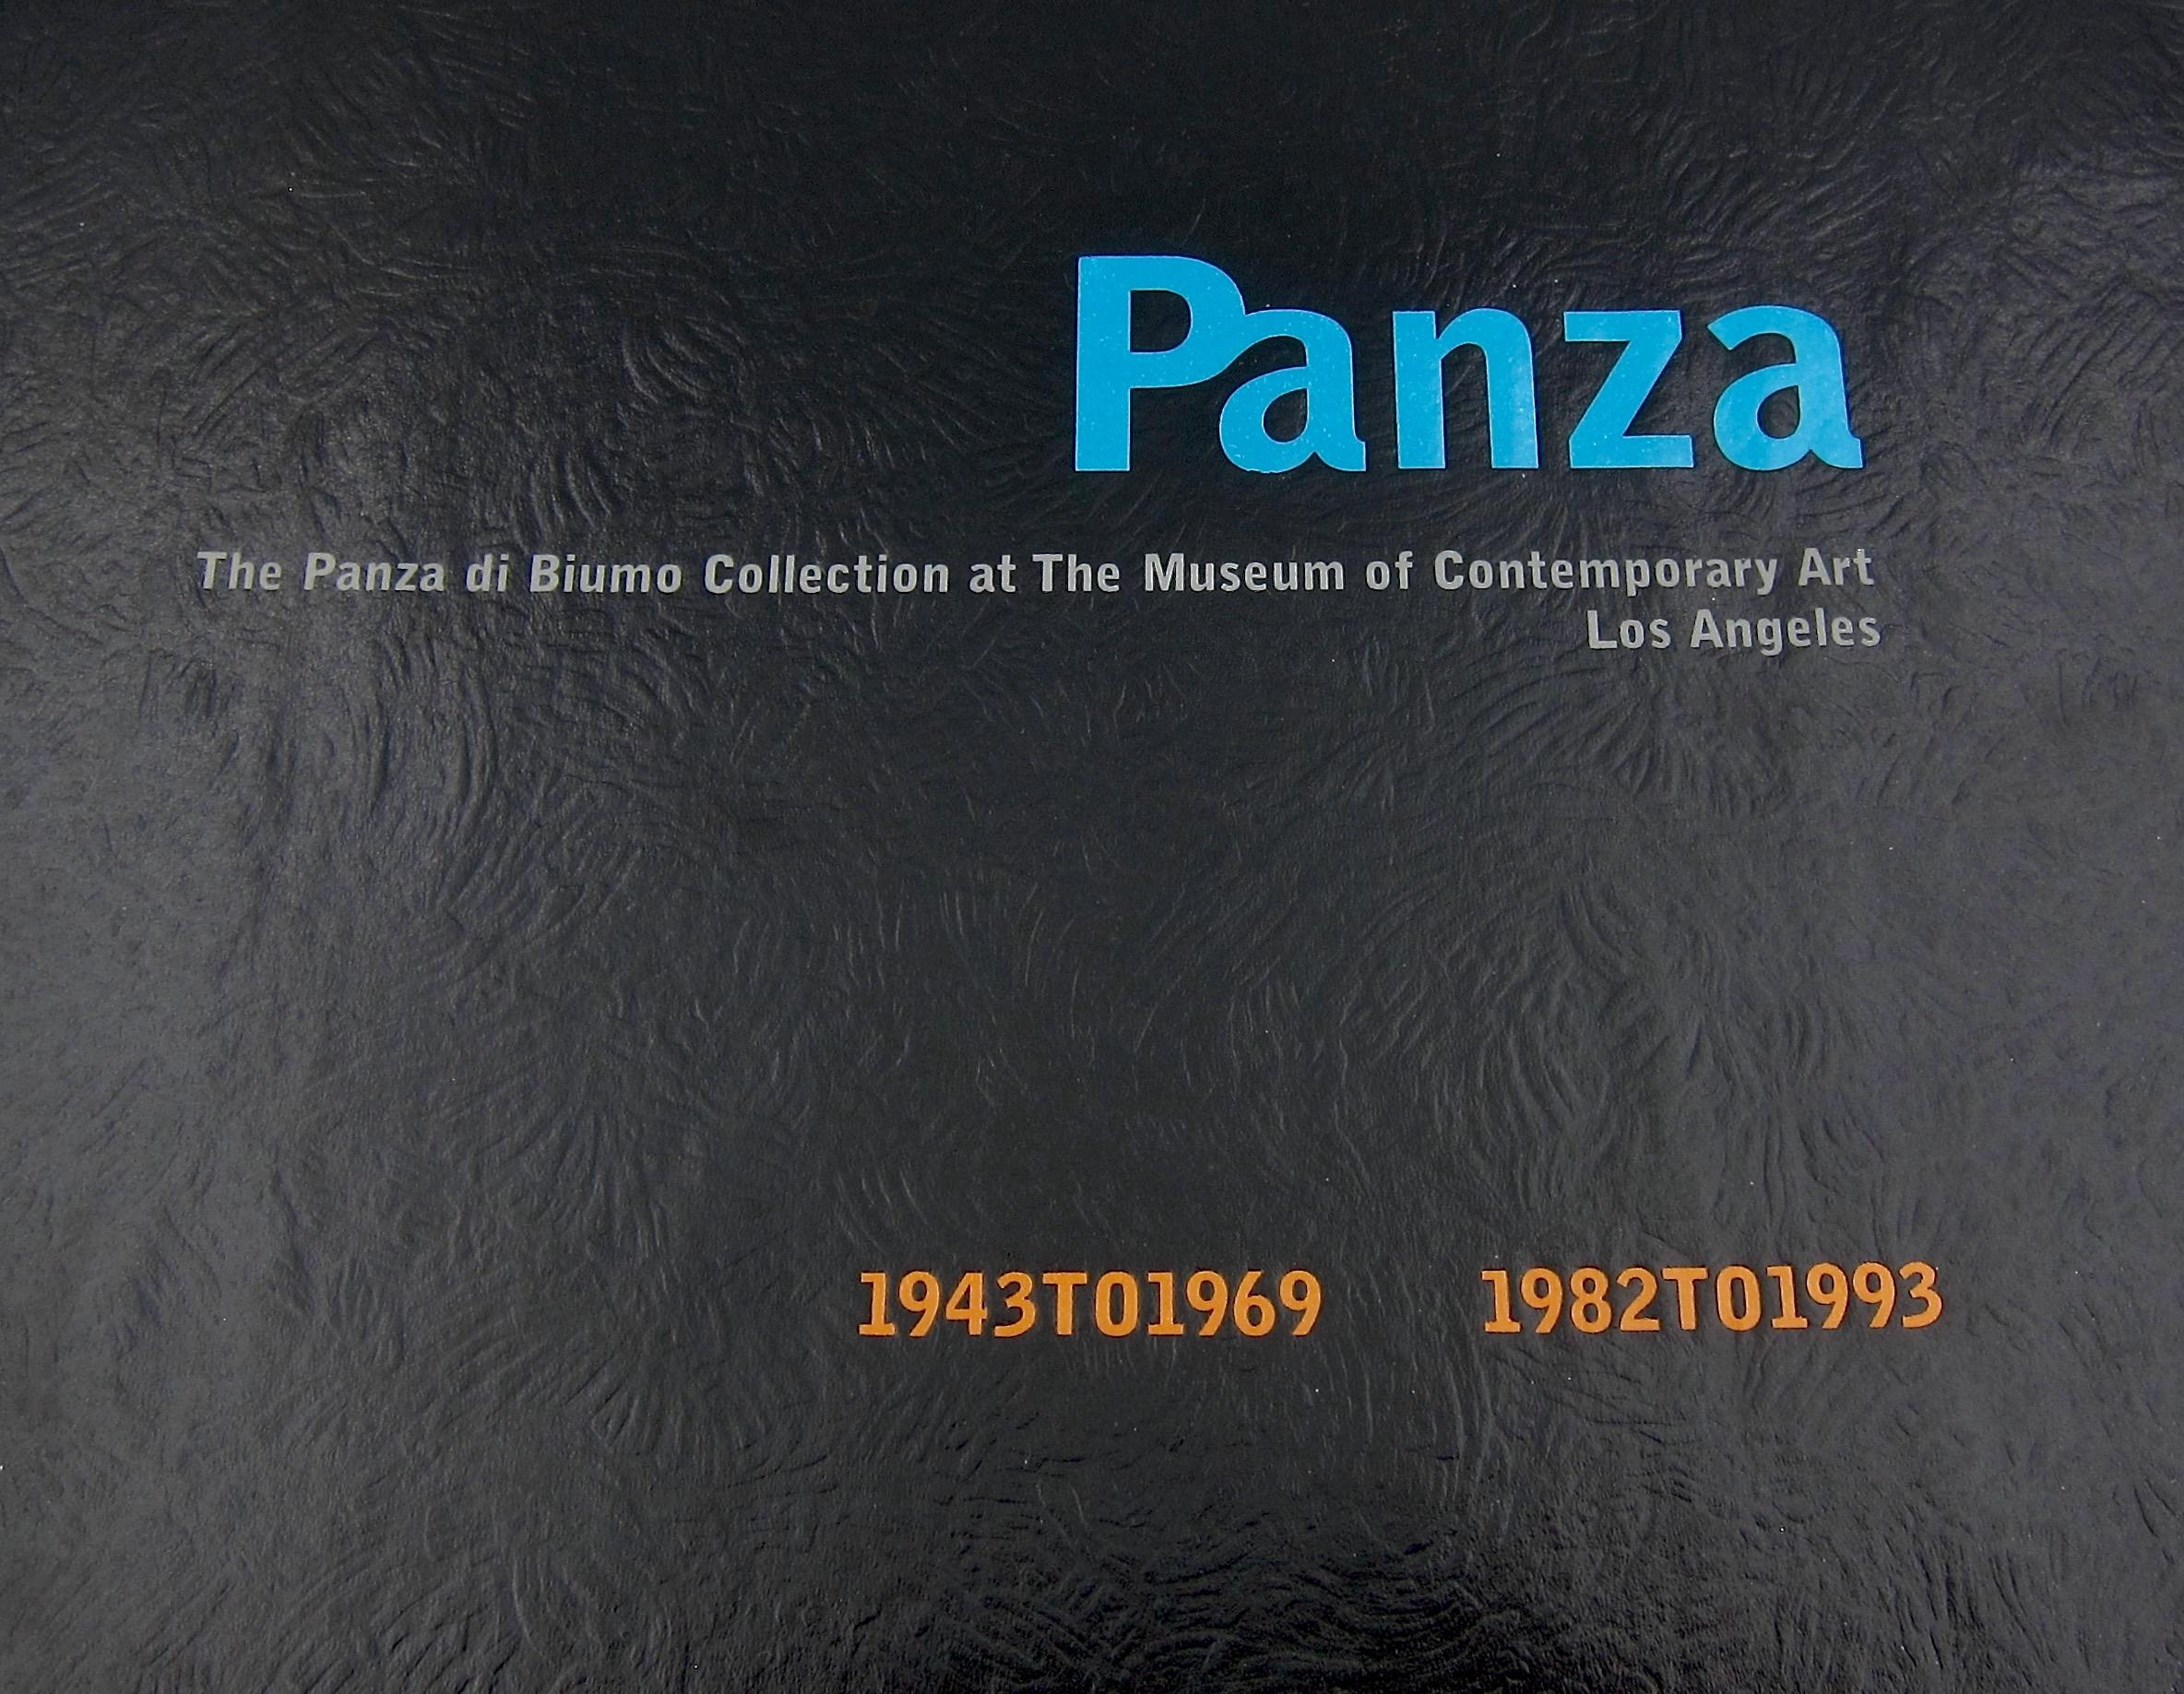 Panza: The Legacy of a Collector. The Panza di Biumo Collection at the Museum of Contemporary Art, Los Angeles. MOCA (January 1, 1999). Softcover: 251 pages with 174 full color reproductions. 

This publication accompanied the exhibition 